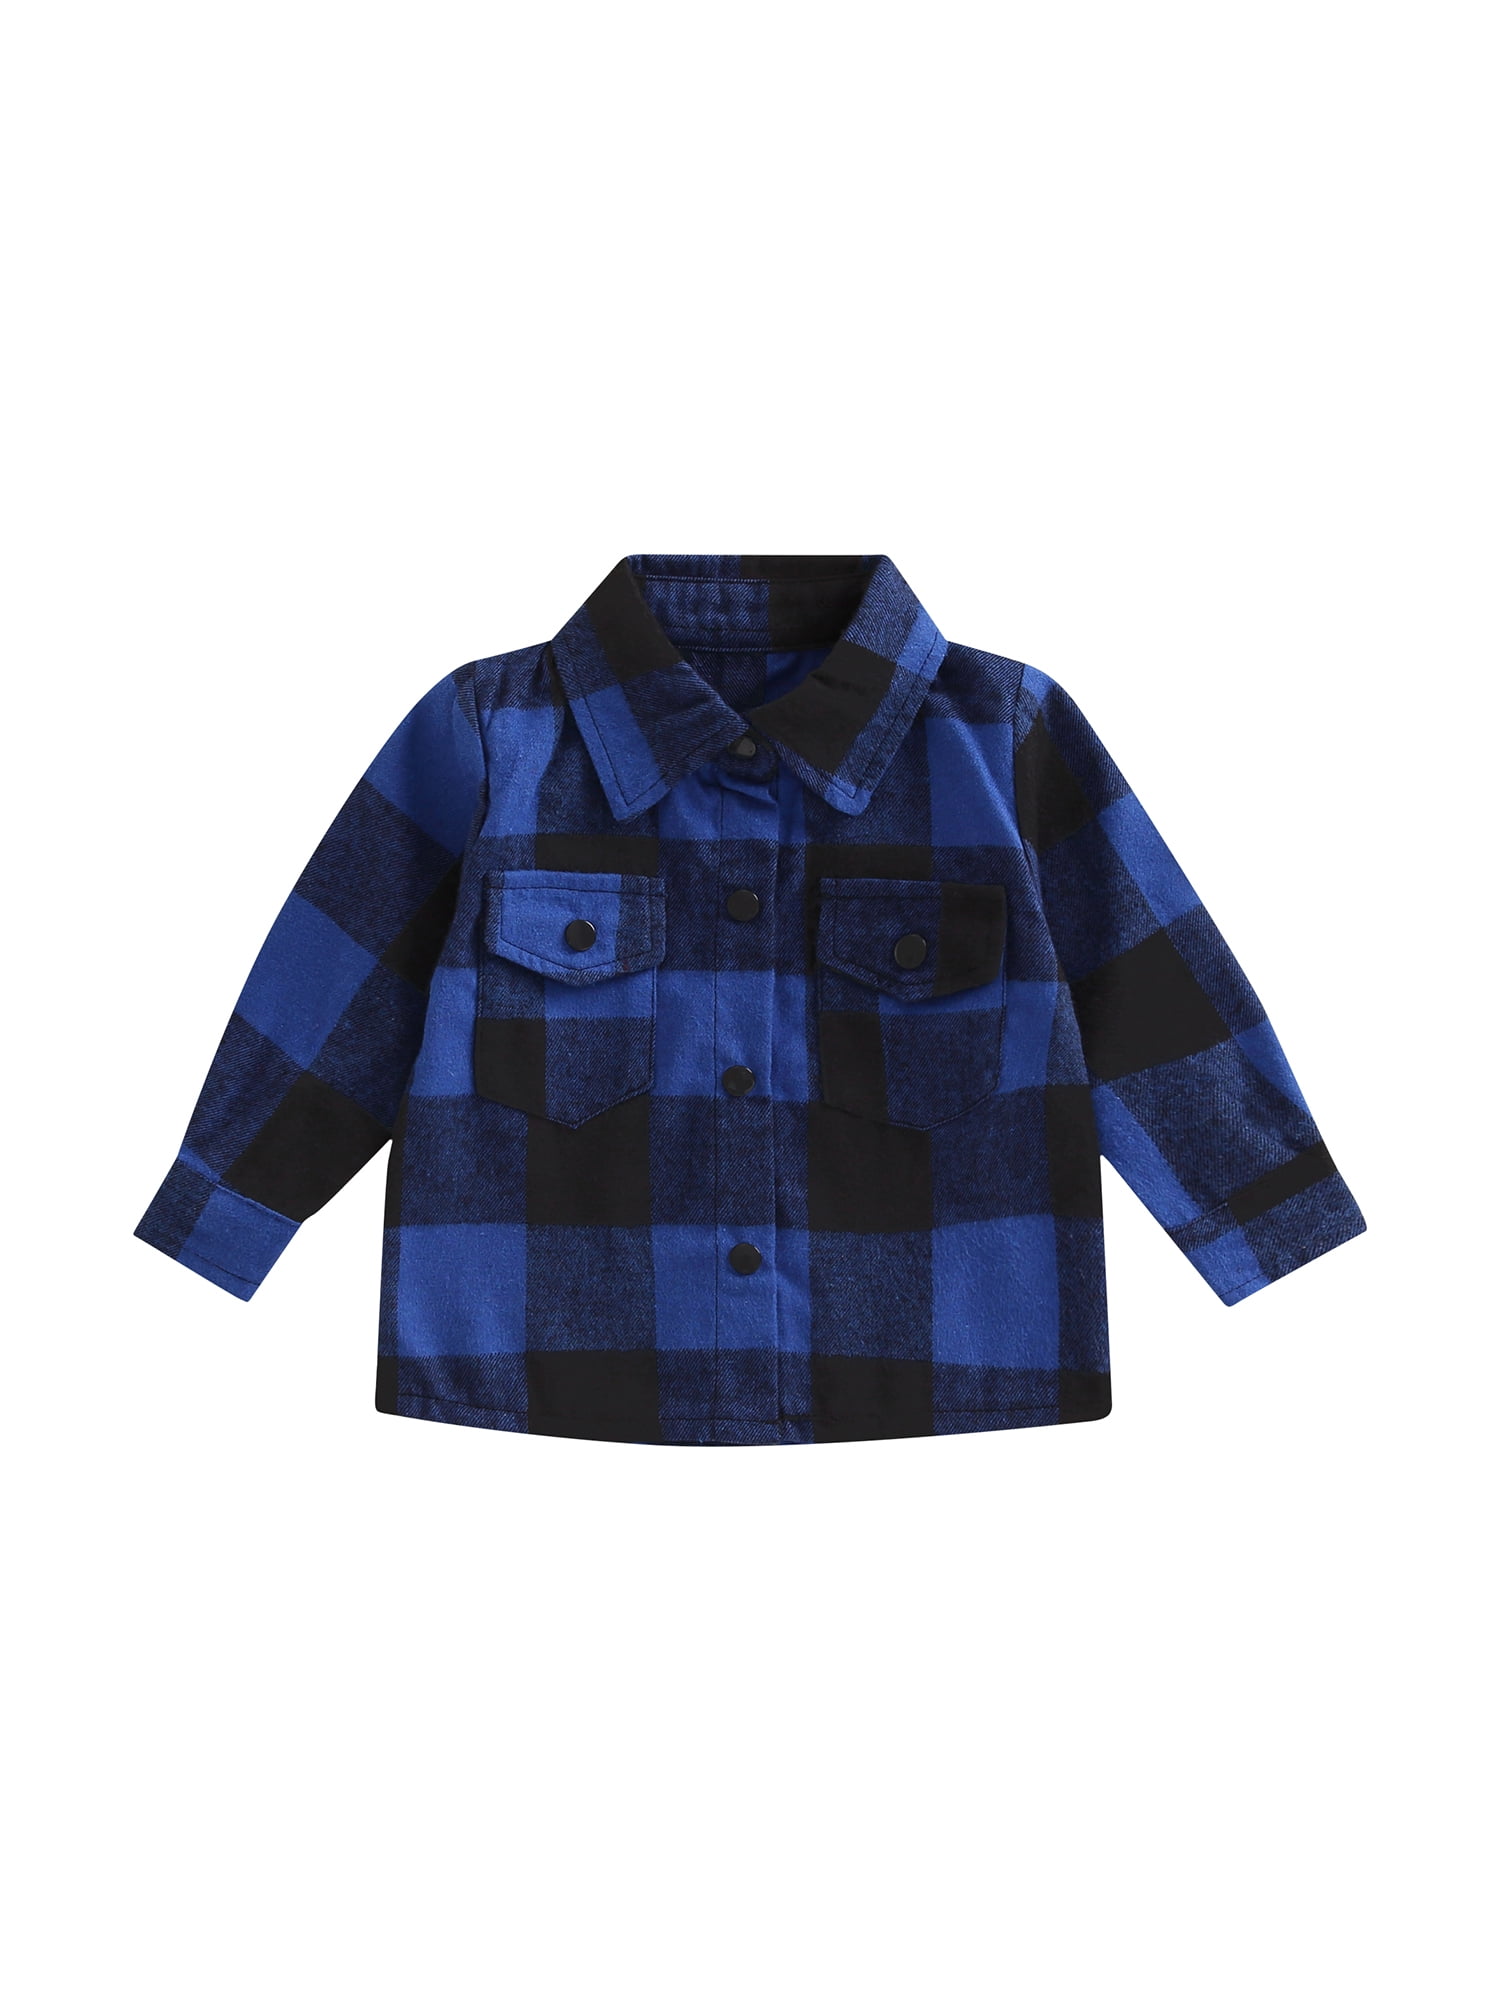 Licupiee Newborn Infant Boy Checkerboard Plaid Print Short Sleeve Button  Down Shirts Shorts Clothes Outfits 